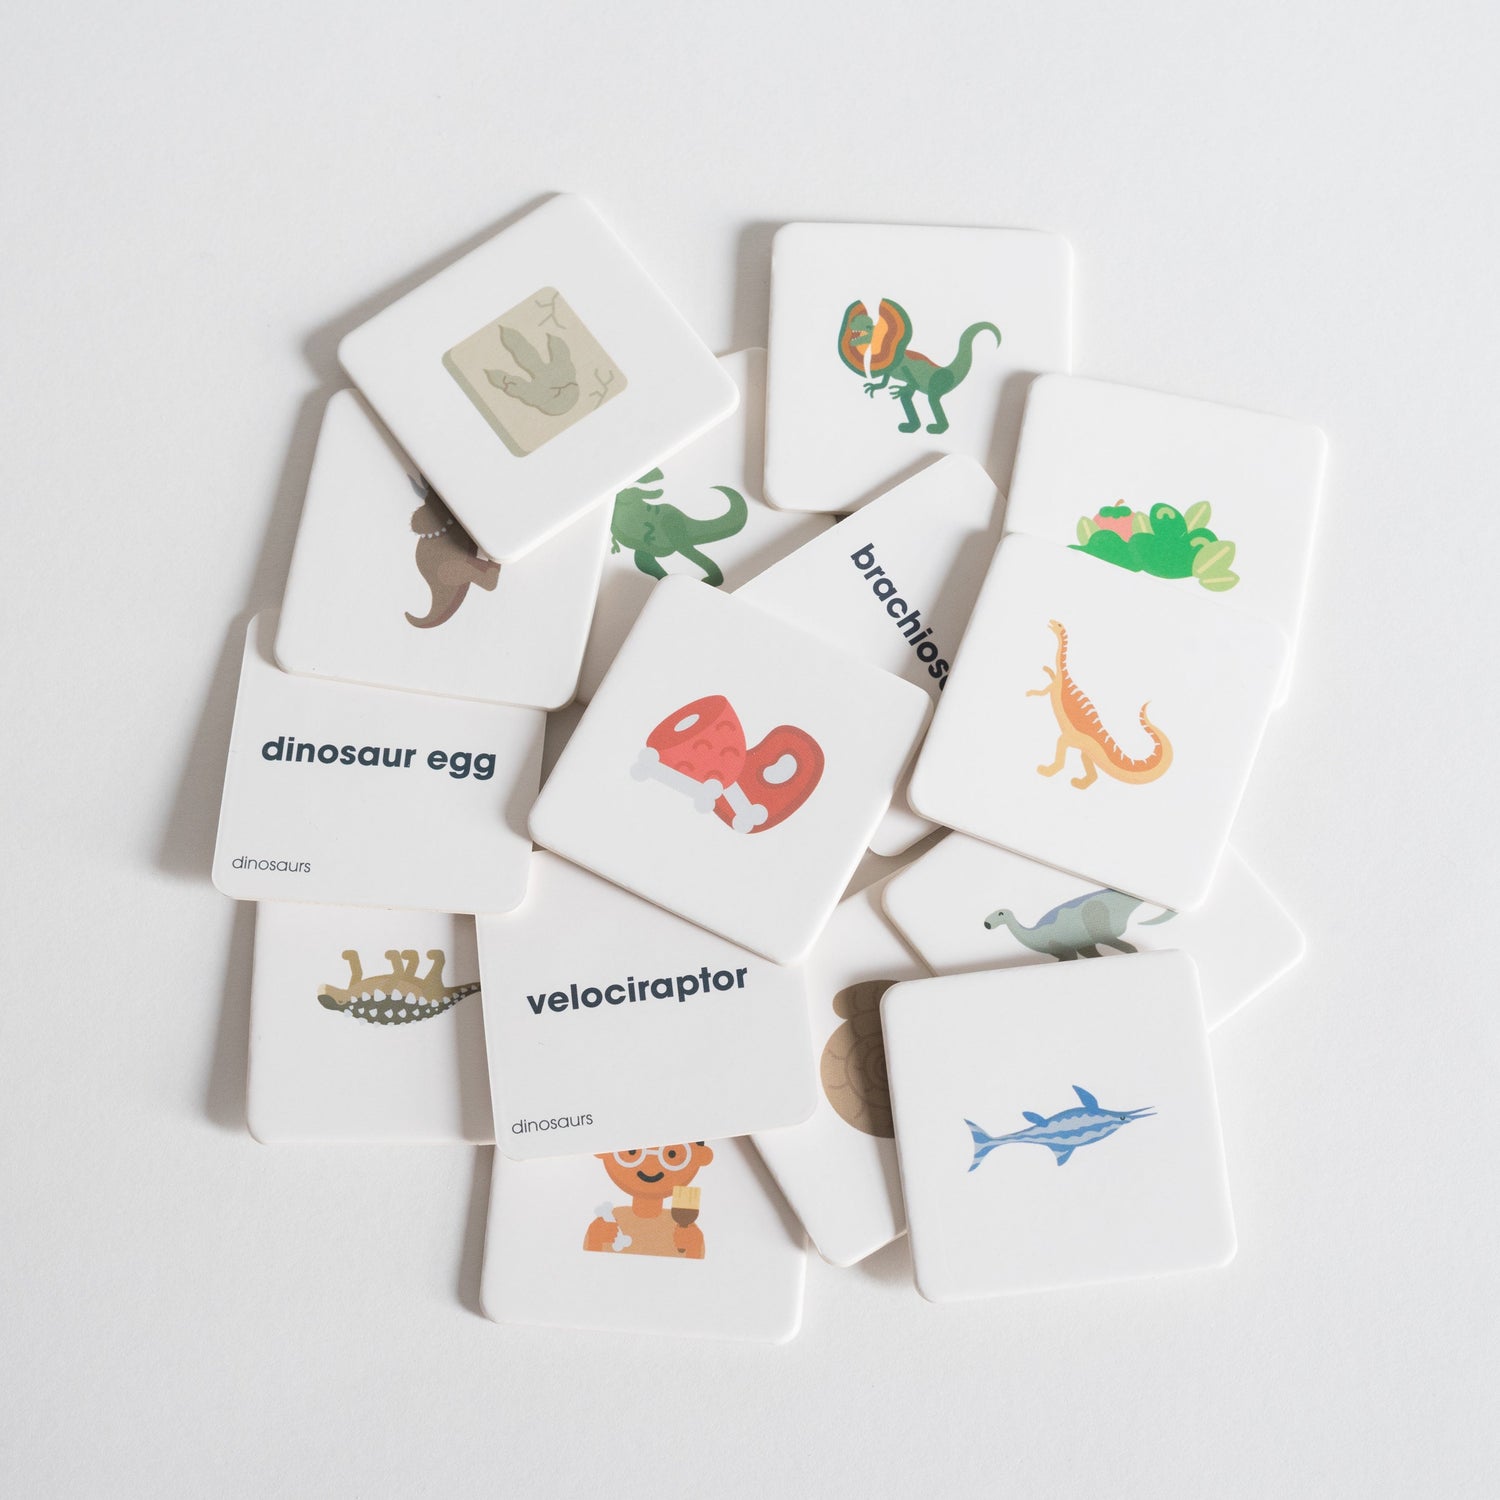 Dinosaurs Pack tiles arranged loosely in a pile on white background